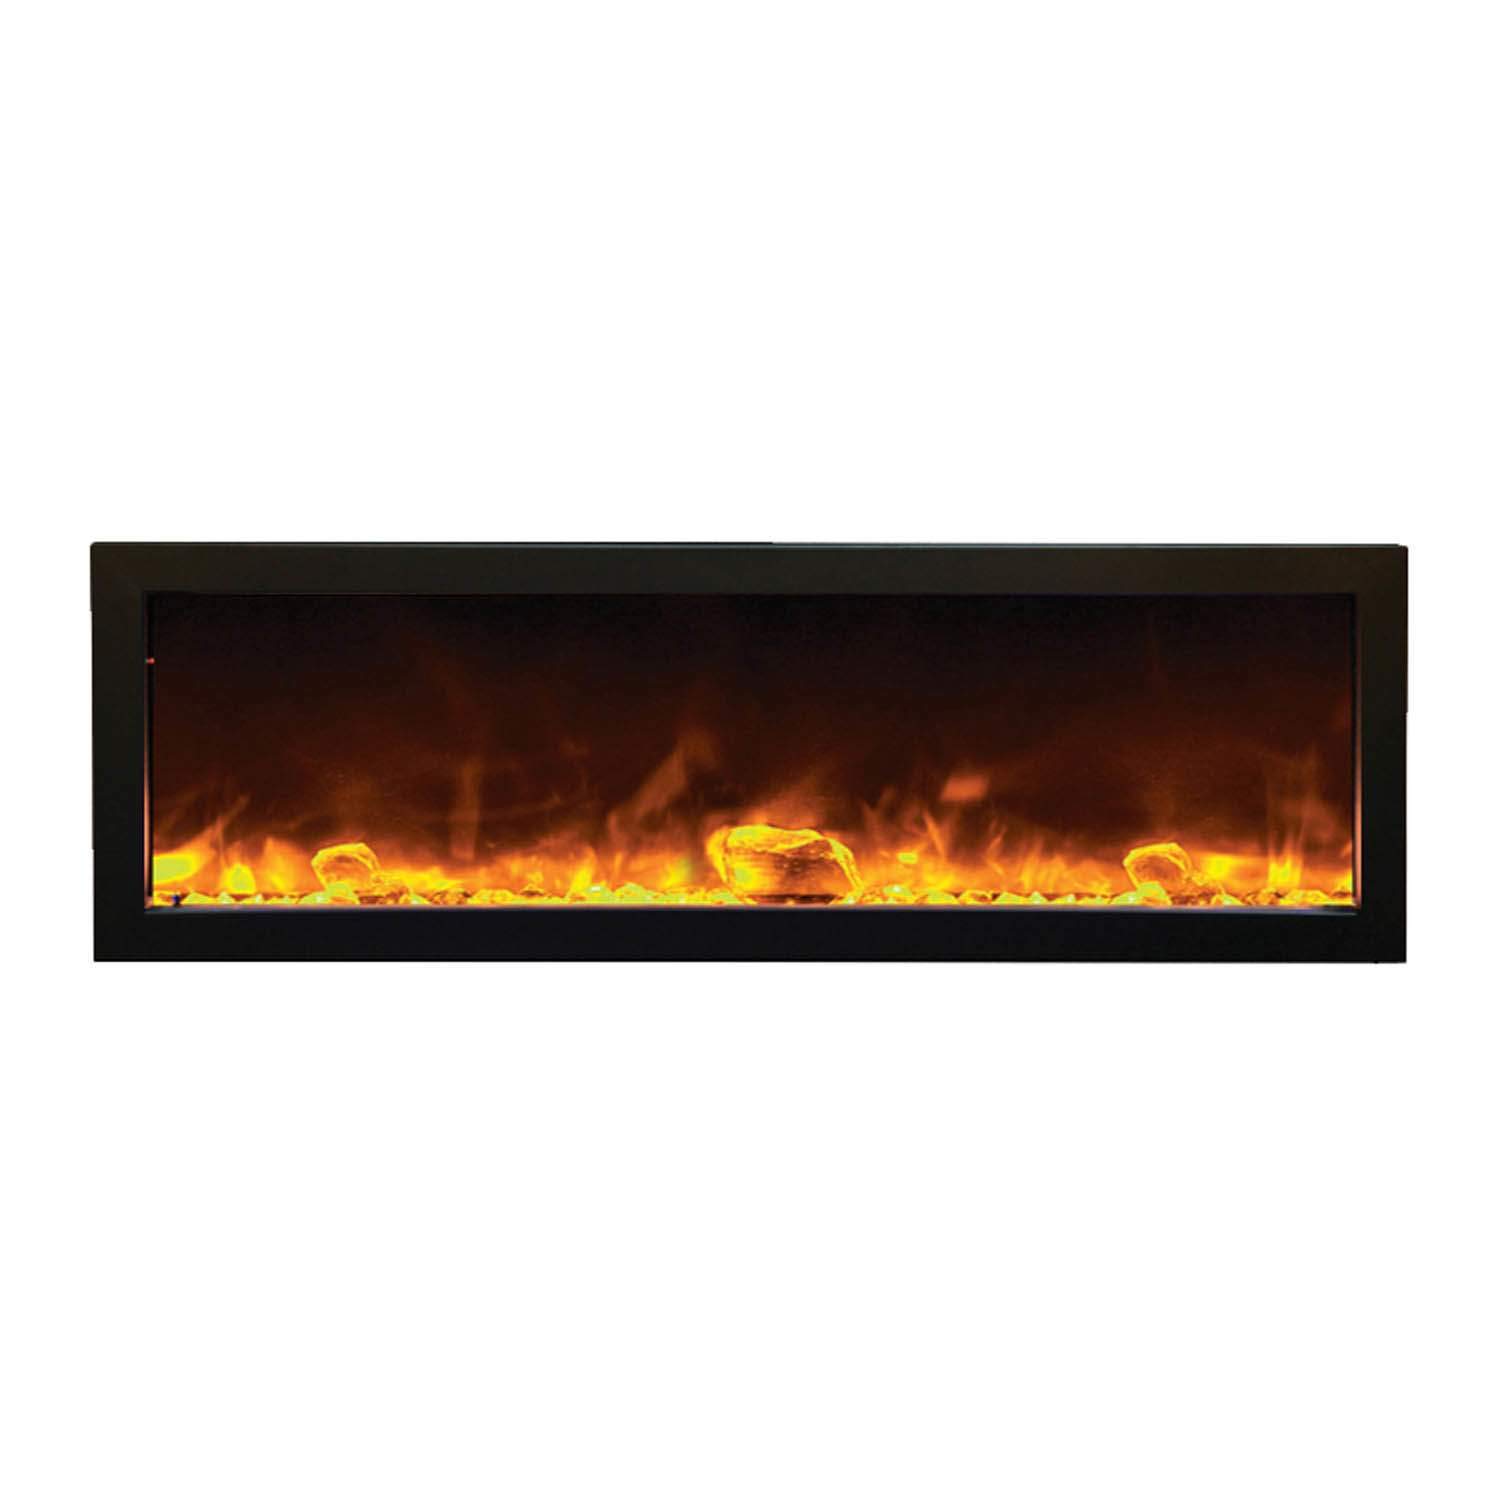 50 inch recessed electric fireplace awesome amantii bi 50 slim od outdoor panorama series of 50 inch recessed electric fireplace